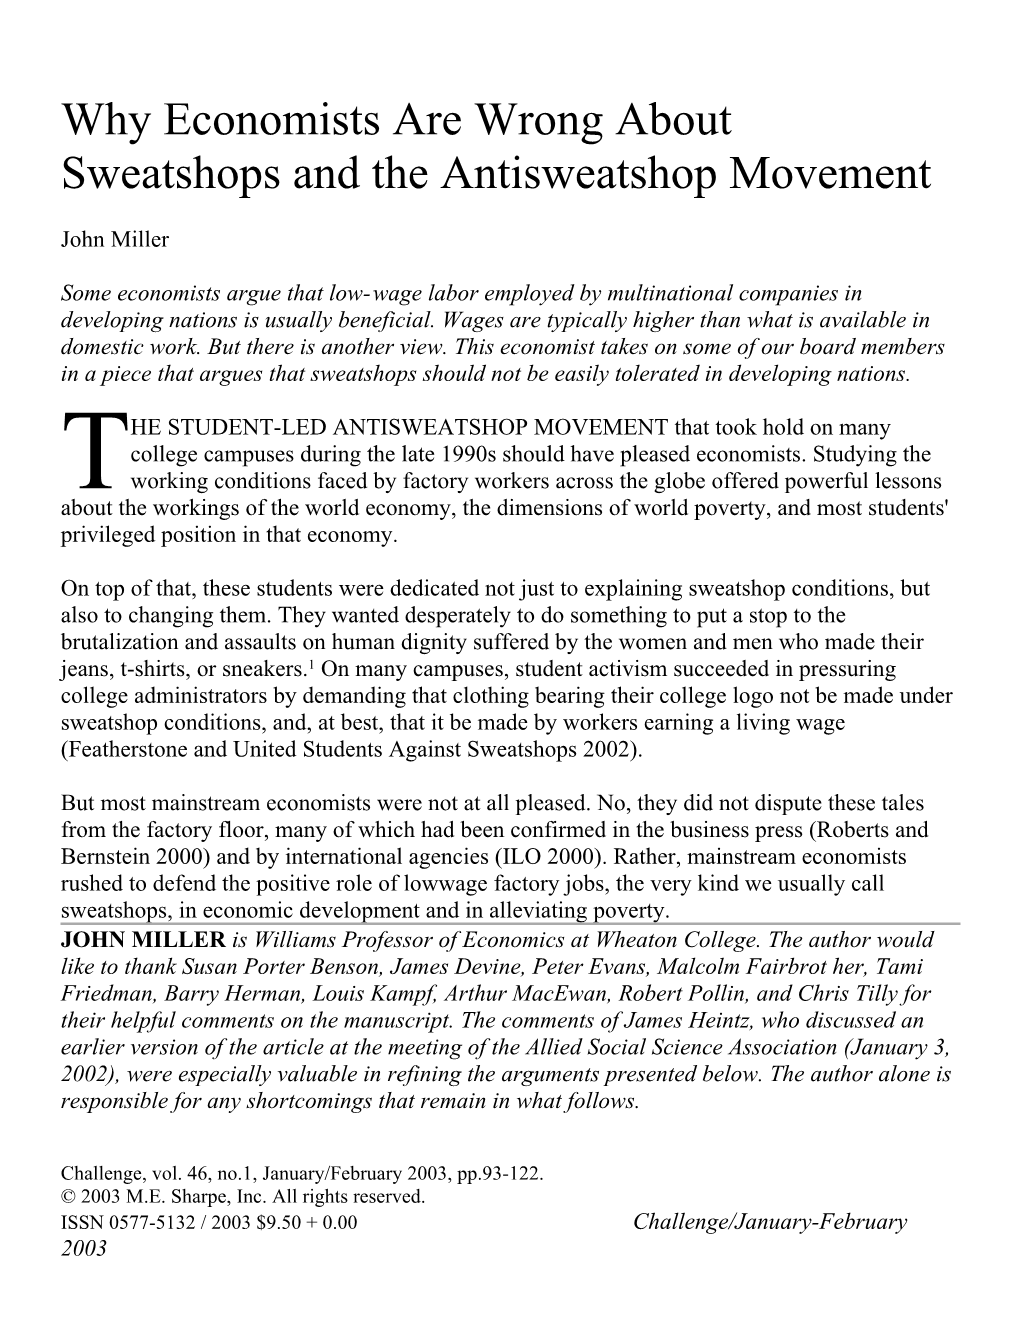 Why Economists Are Wrong About Sweatshops And The Antisweatshop Movement